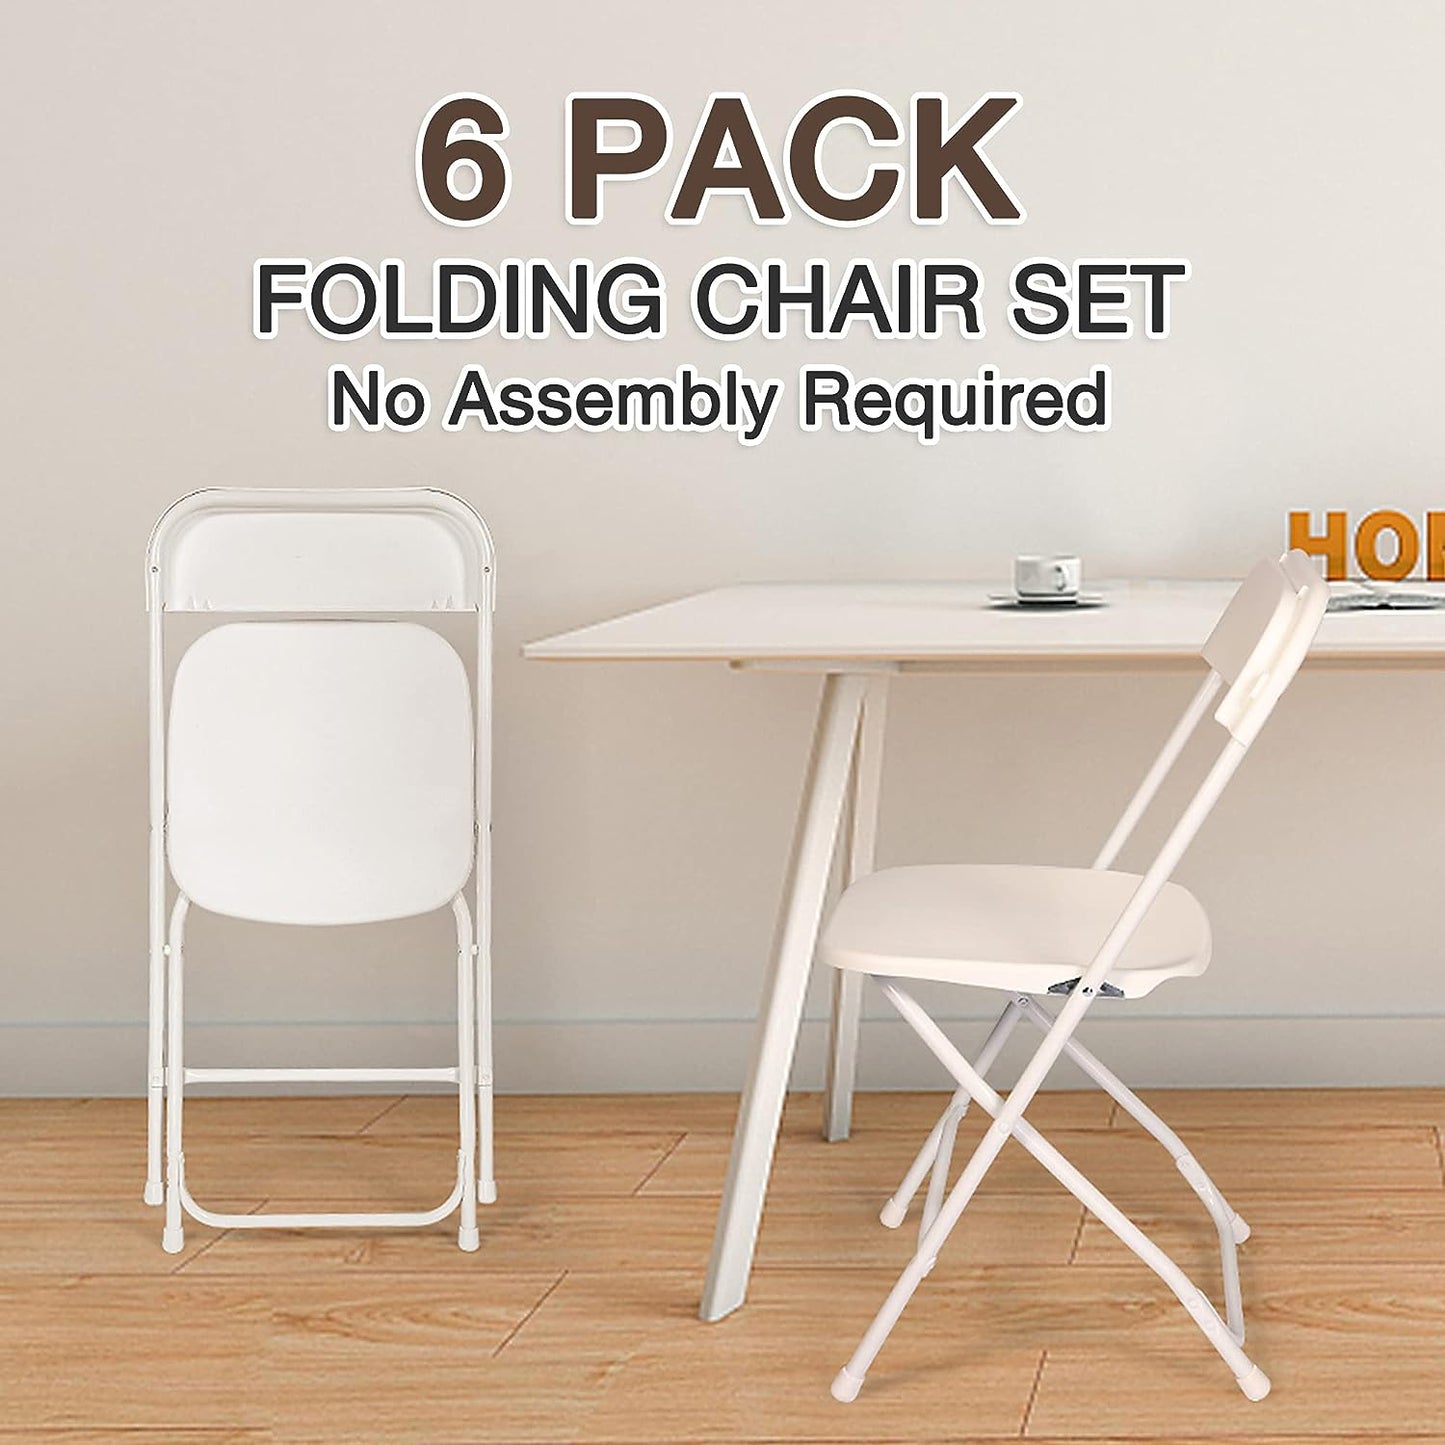 LUCKYERMORE Set of 6 Folding Chairs Plastic Outdoor Party Chairs Stackable Indoor Outdoor Chair